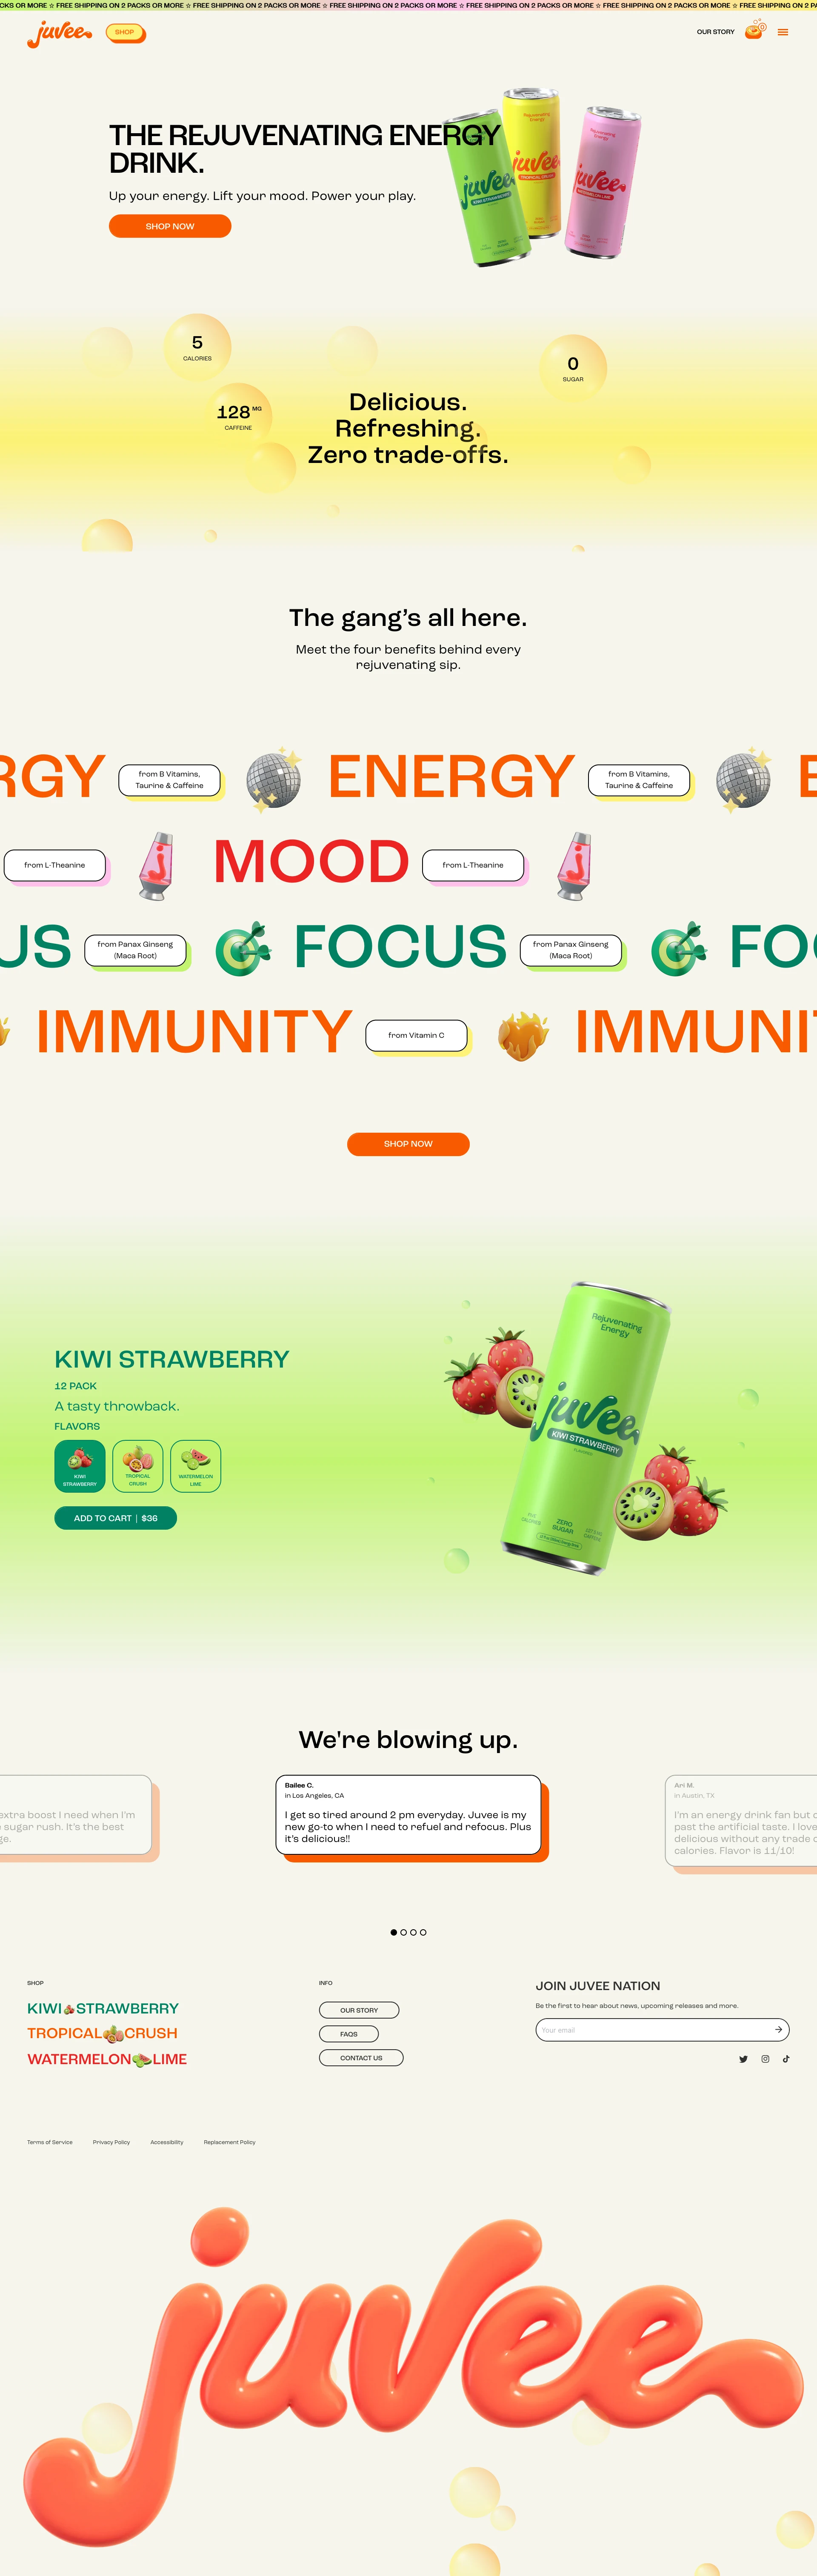 Juvee Landing Page Example: Meet Juvee, the rejuvenating energy drink for all! Power your play. 0g of sugar.